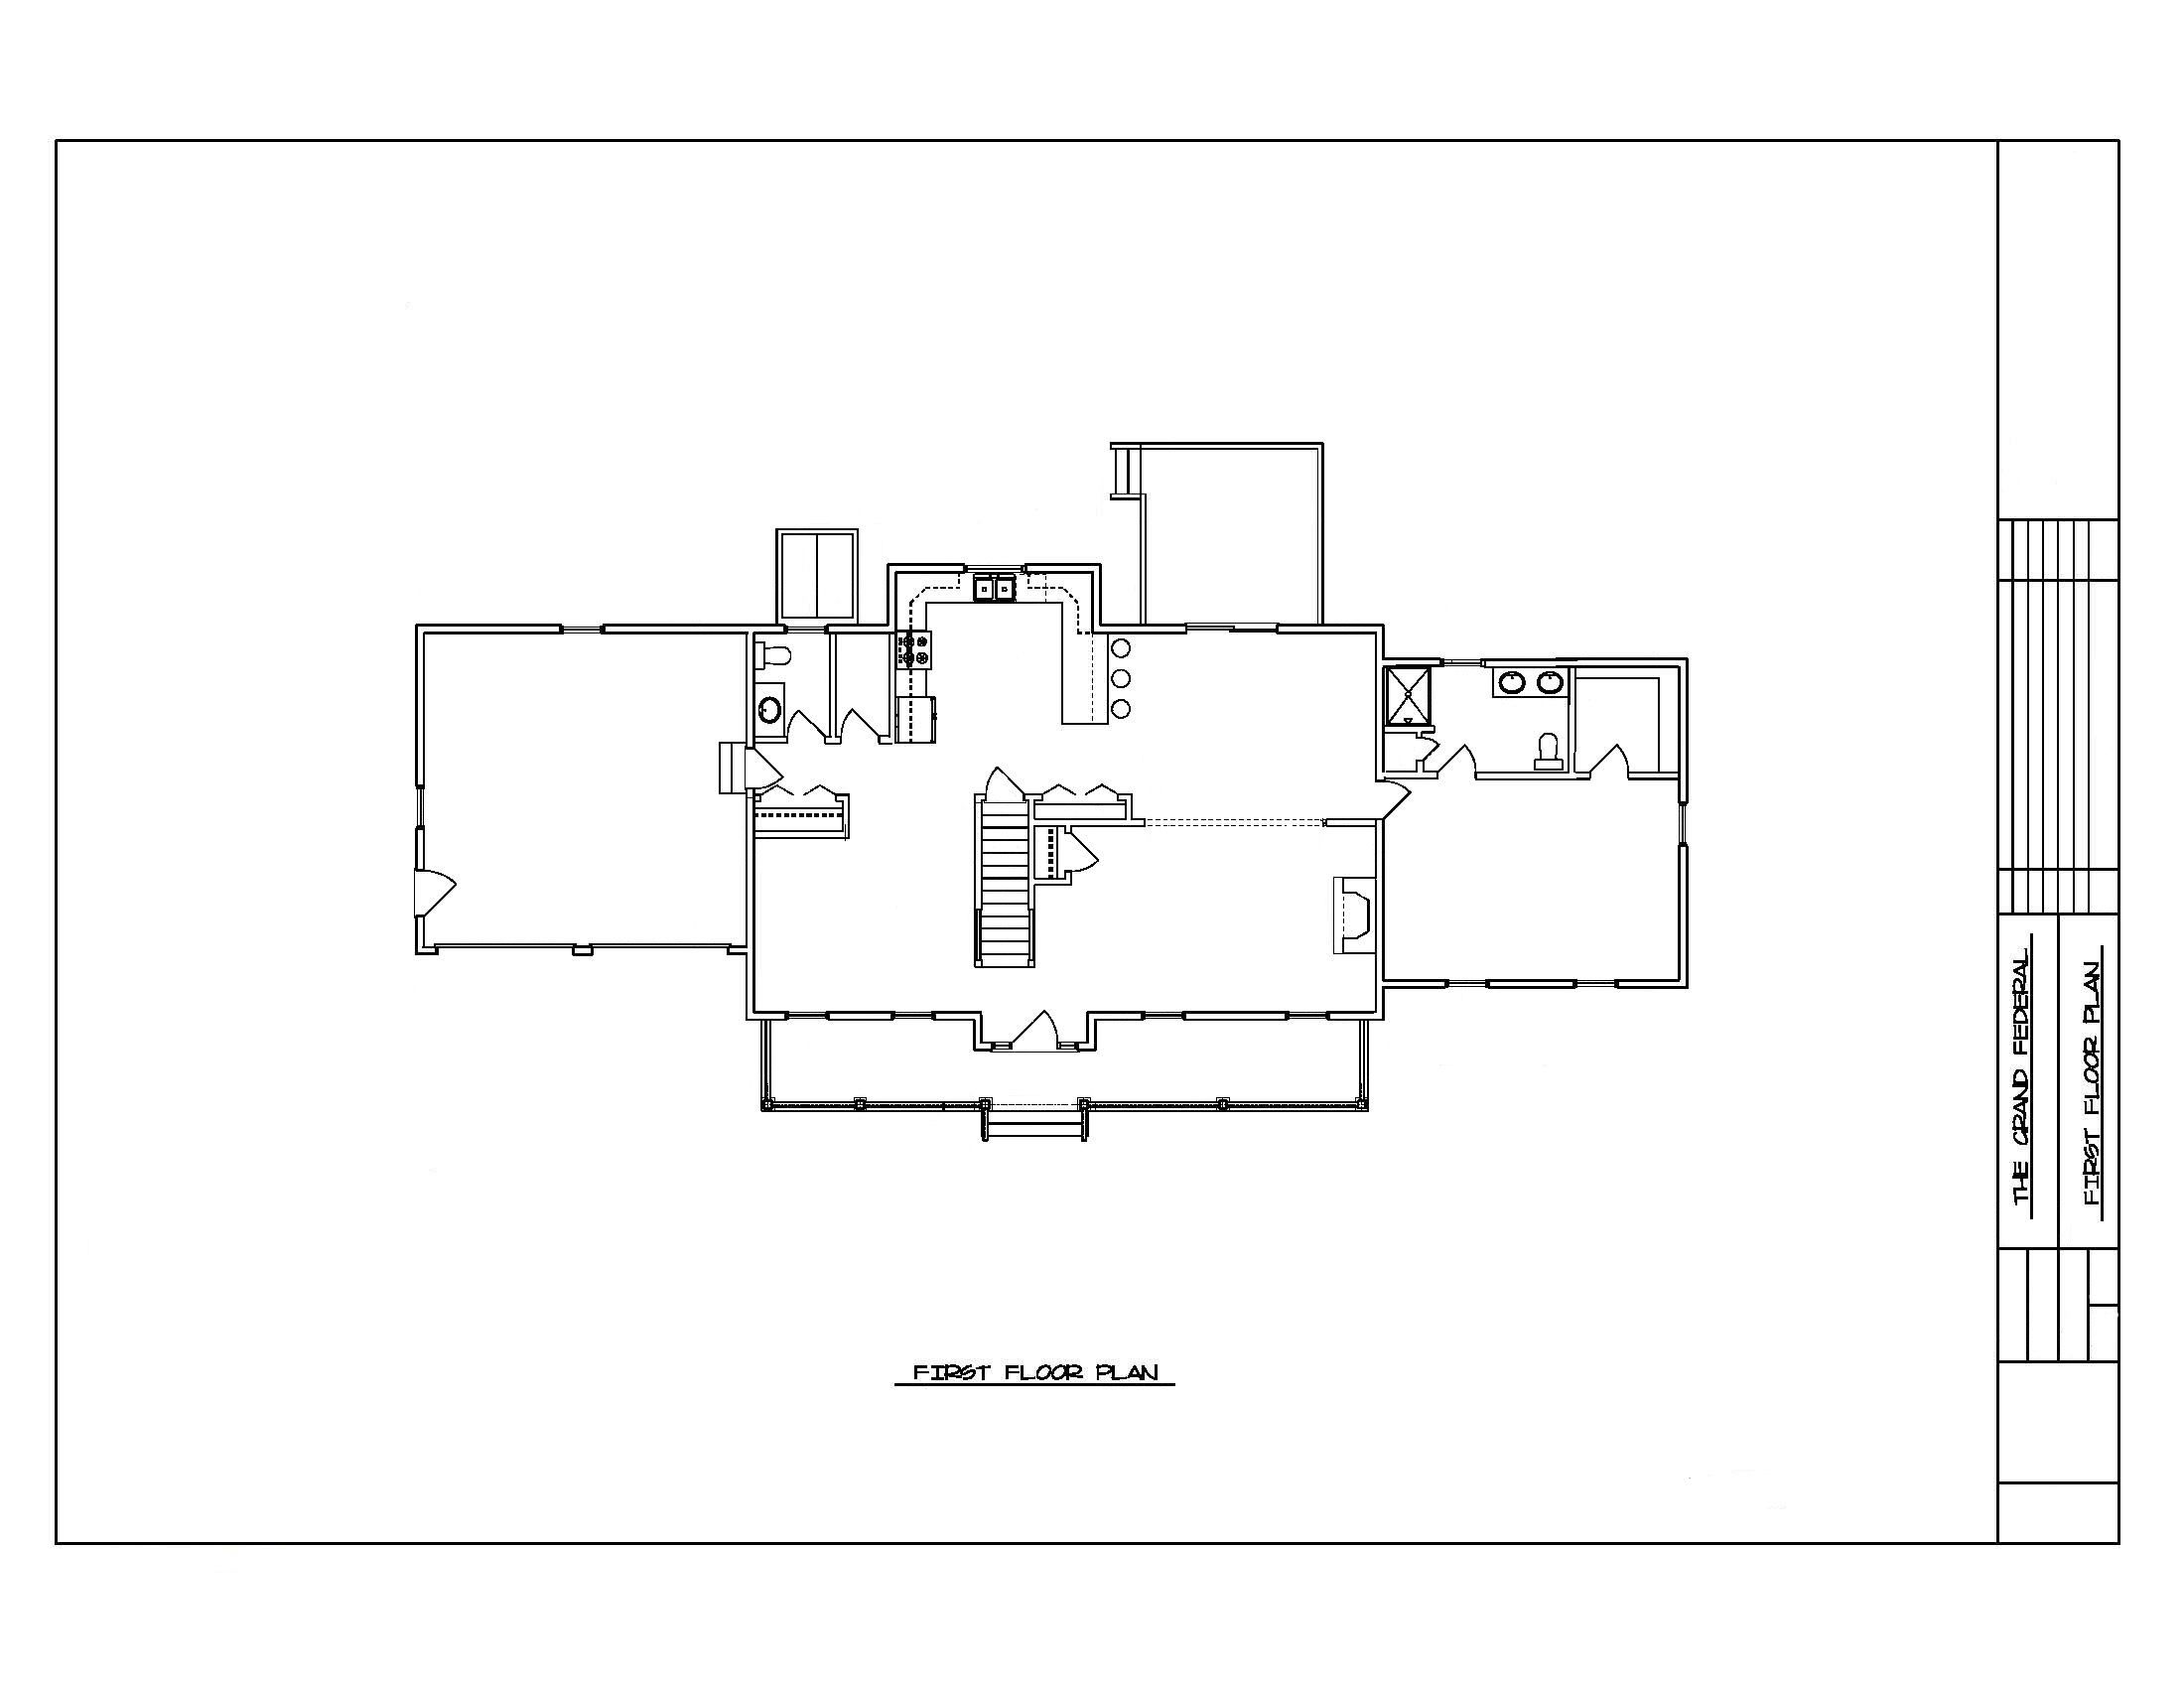 The Grand Federal I First Floor Plan